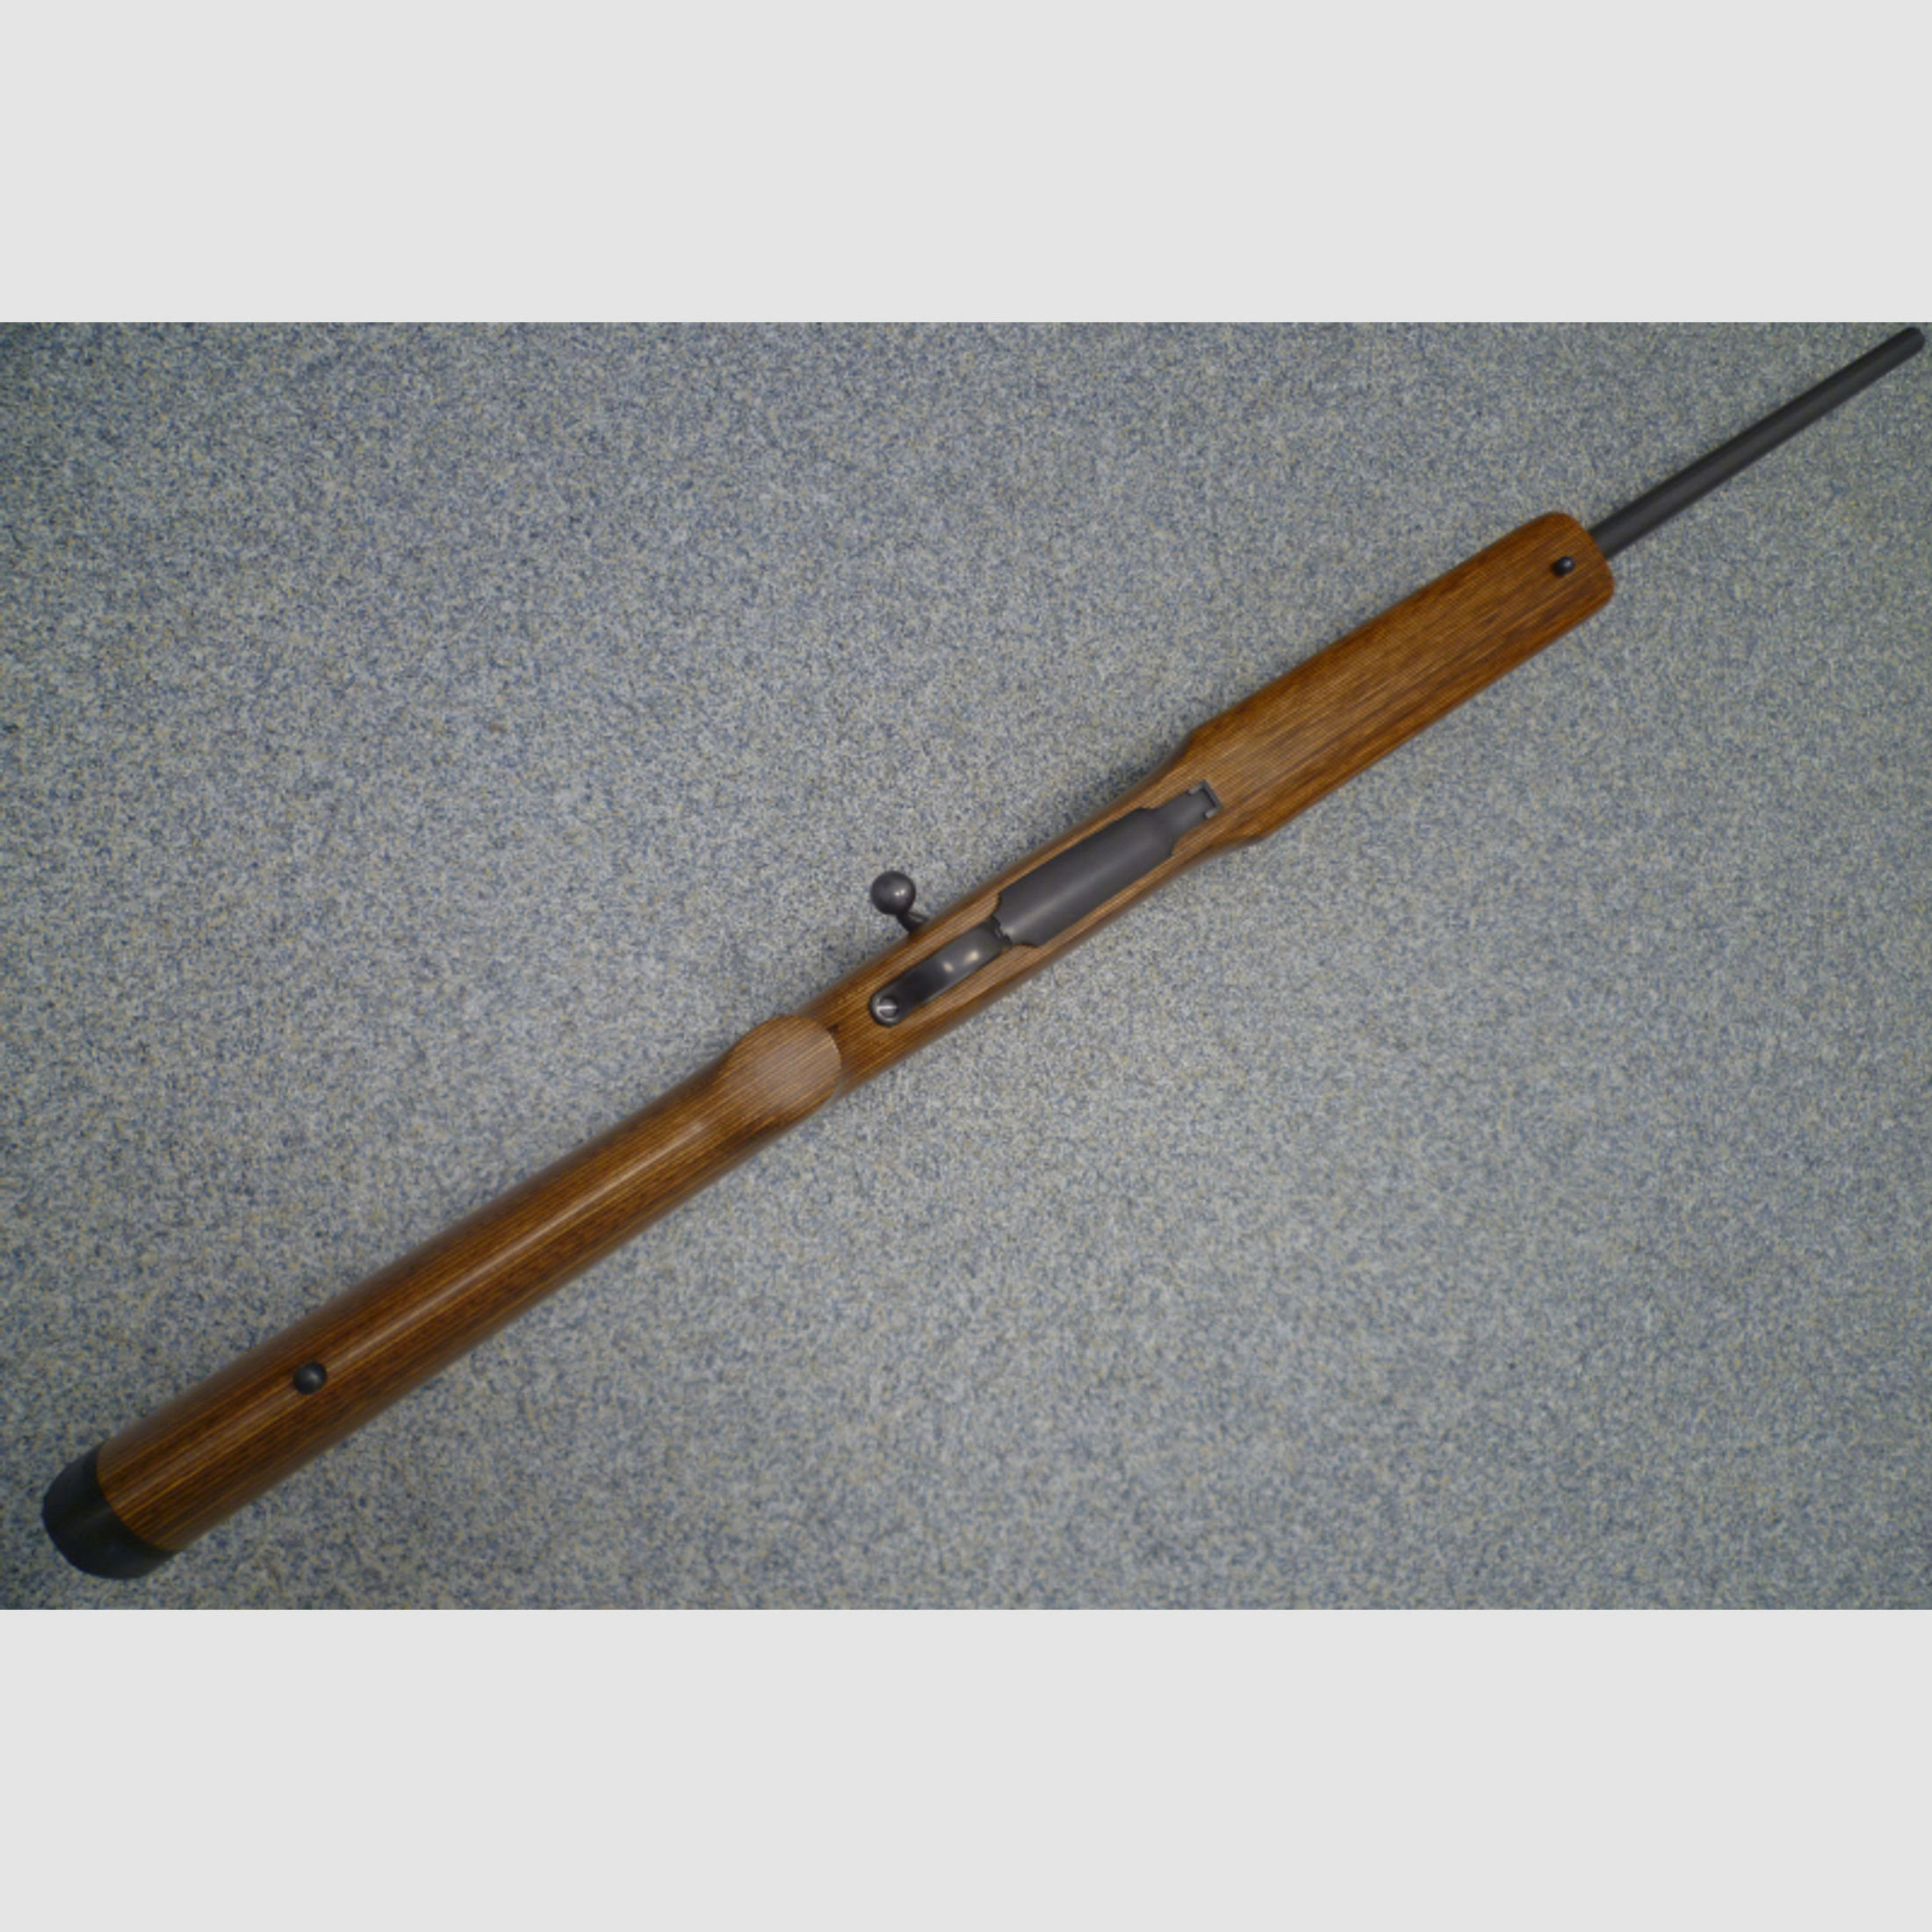 Repetierbüchse Ruger M77 Mark II .308 Win. stainless